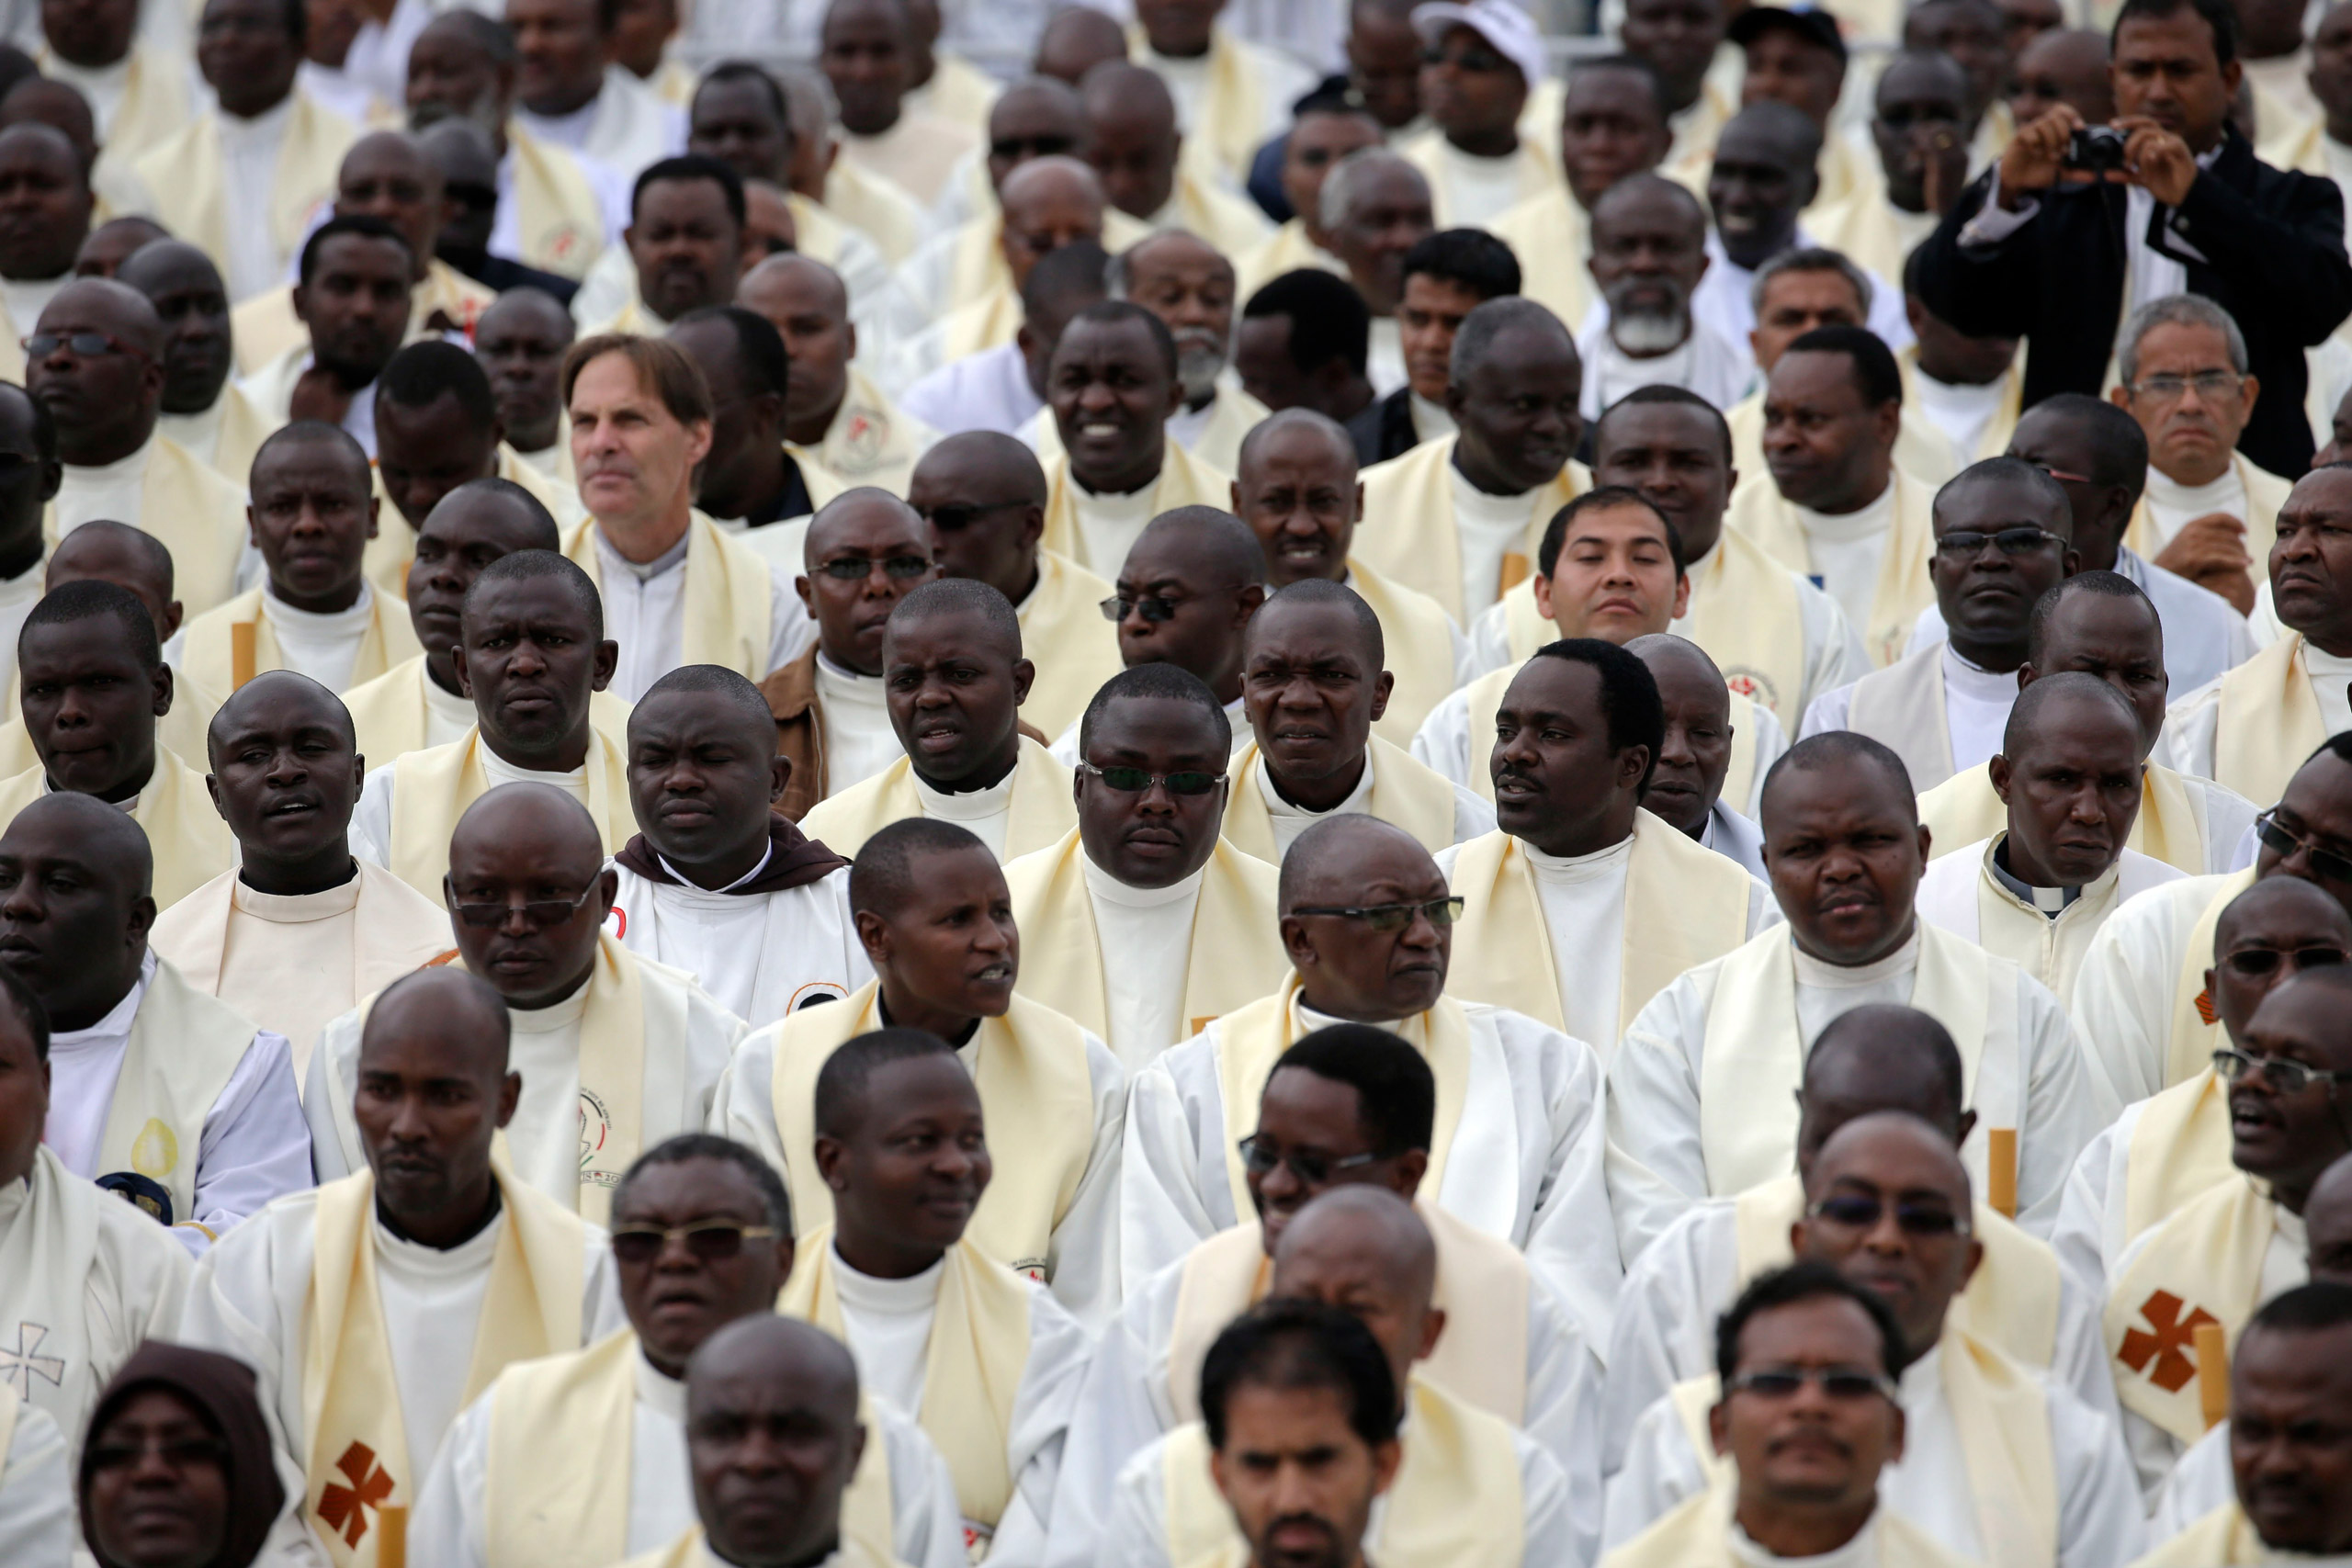 Priests attend a Mass celebrated by Pope Francis on the campus of the University of Nairobi on Nov. 26, 2015.